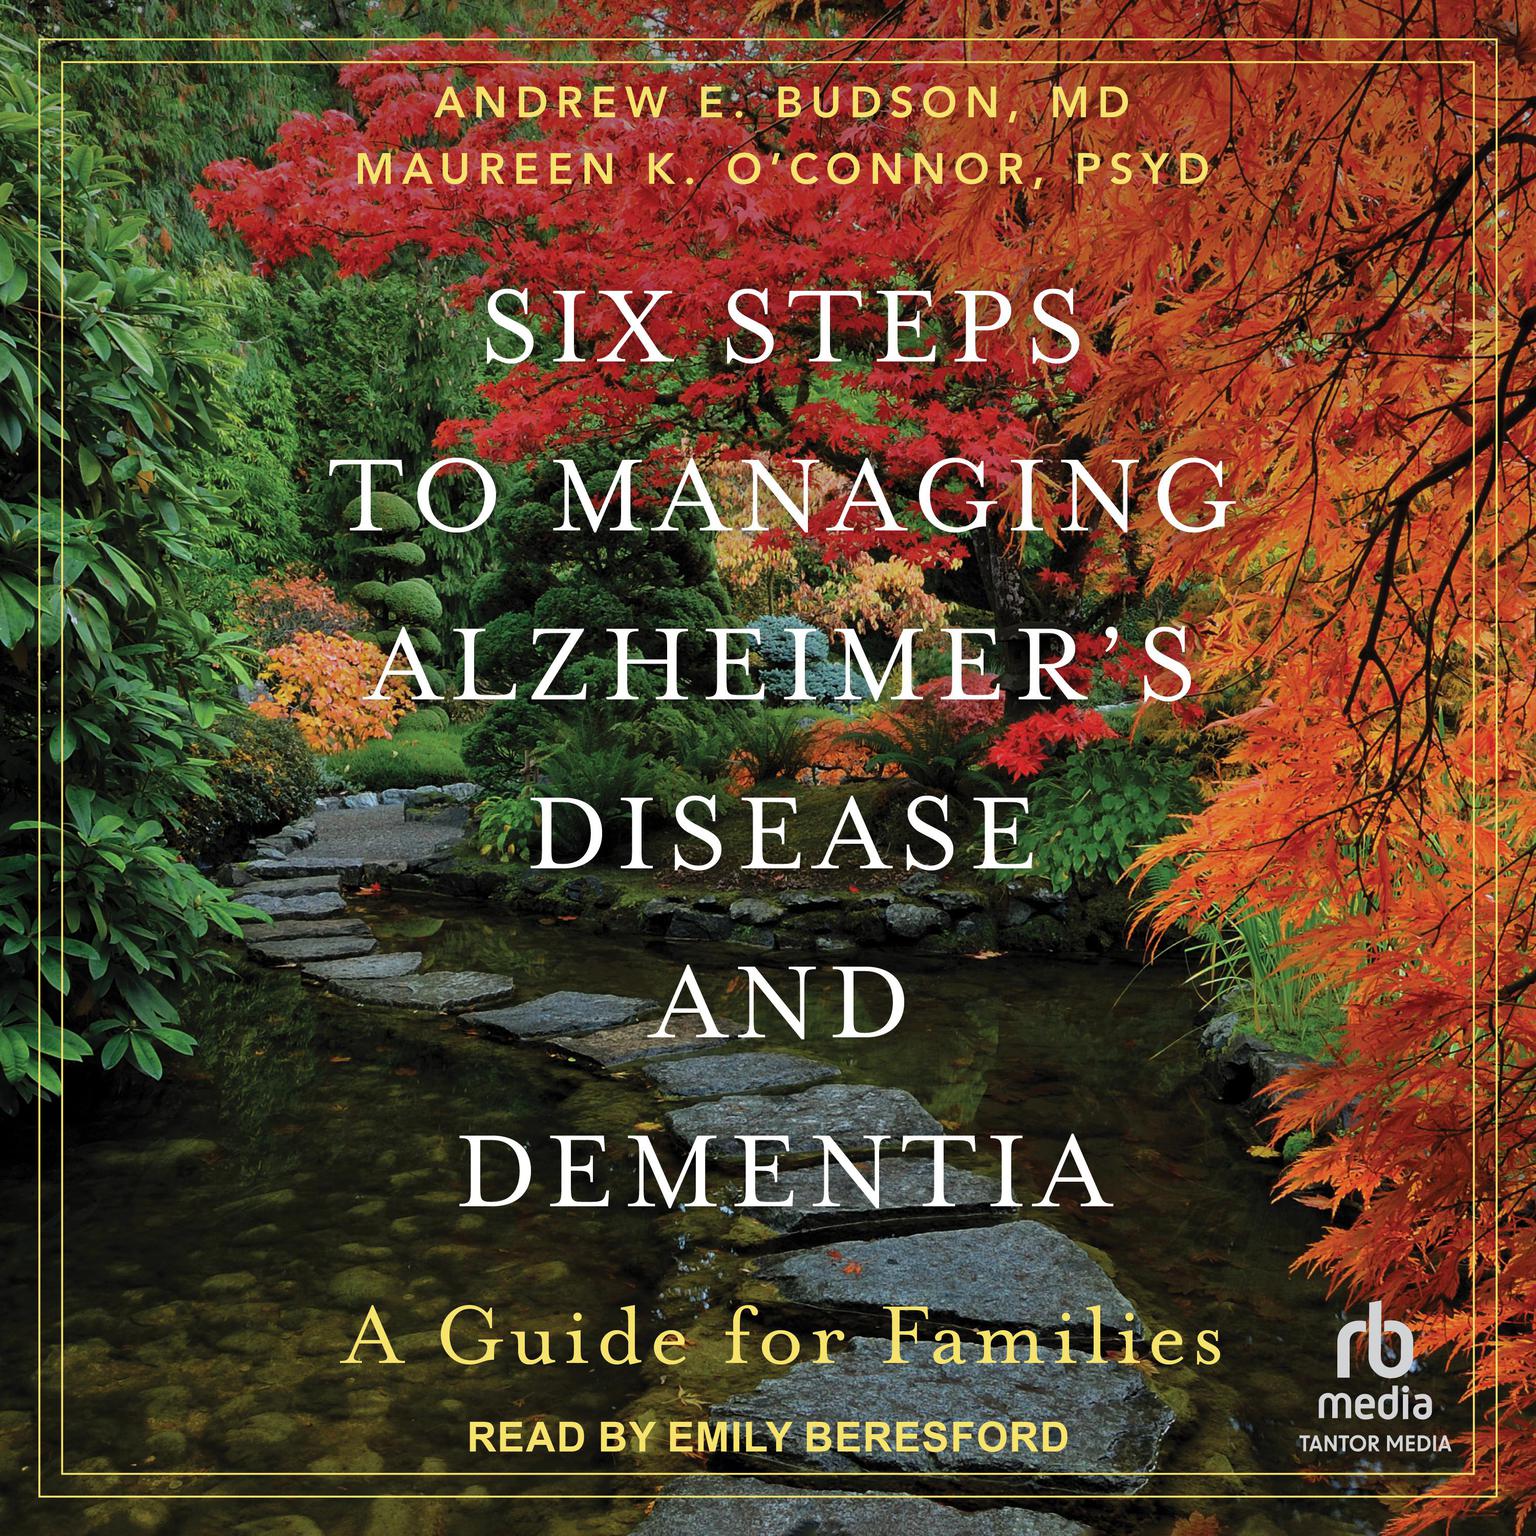 Six Steps to Managing Alzheimers Disease and Dementia: A Guide for Families Audiobook, by Andrew E. Budson